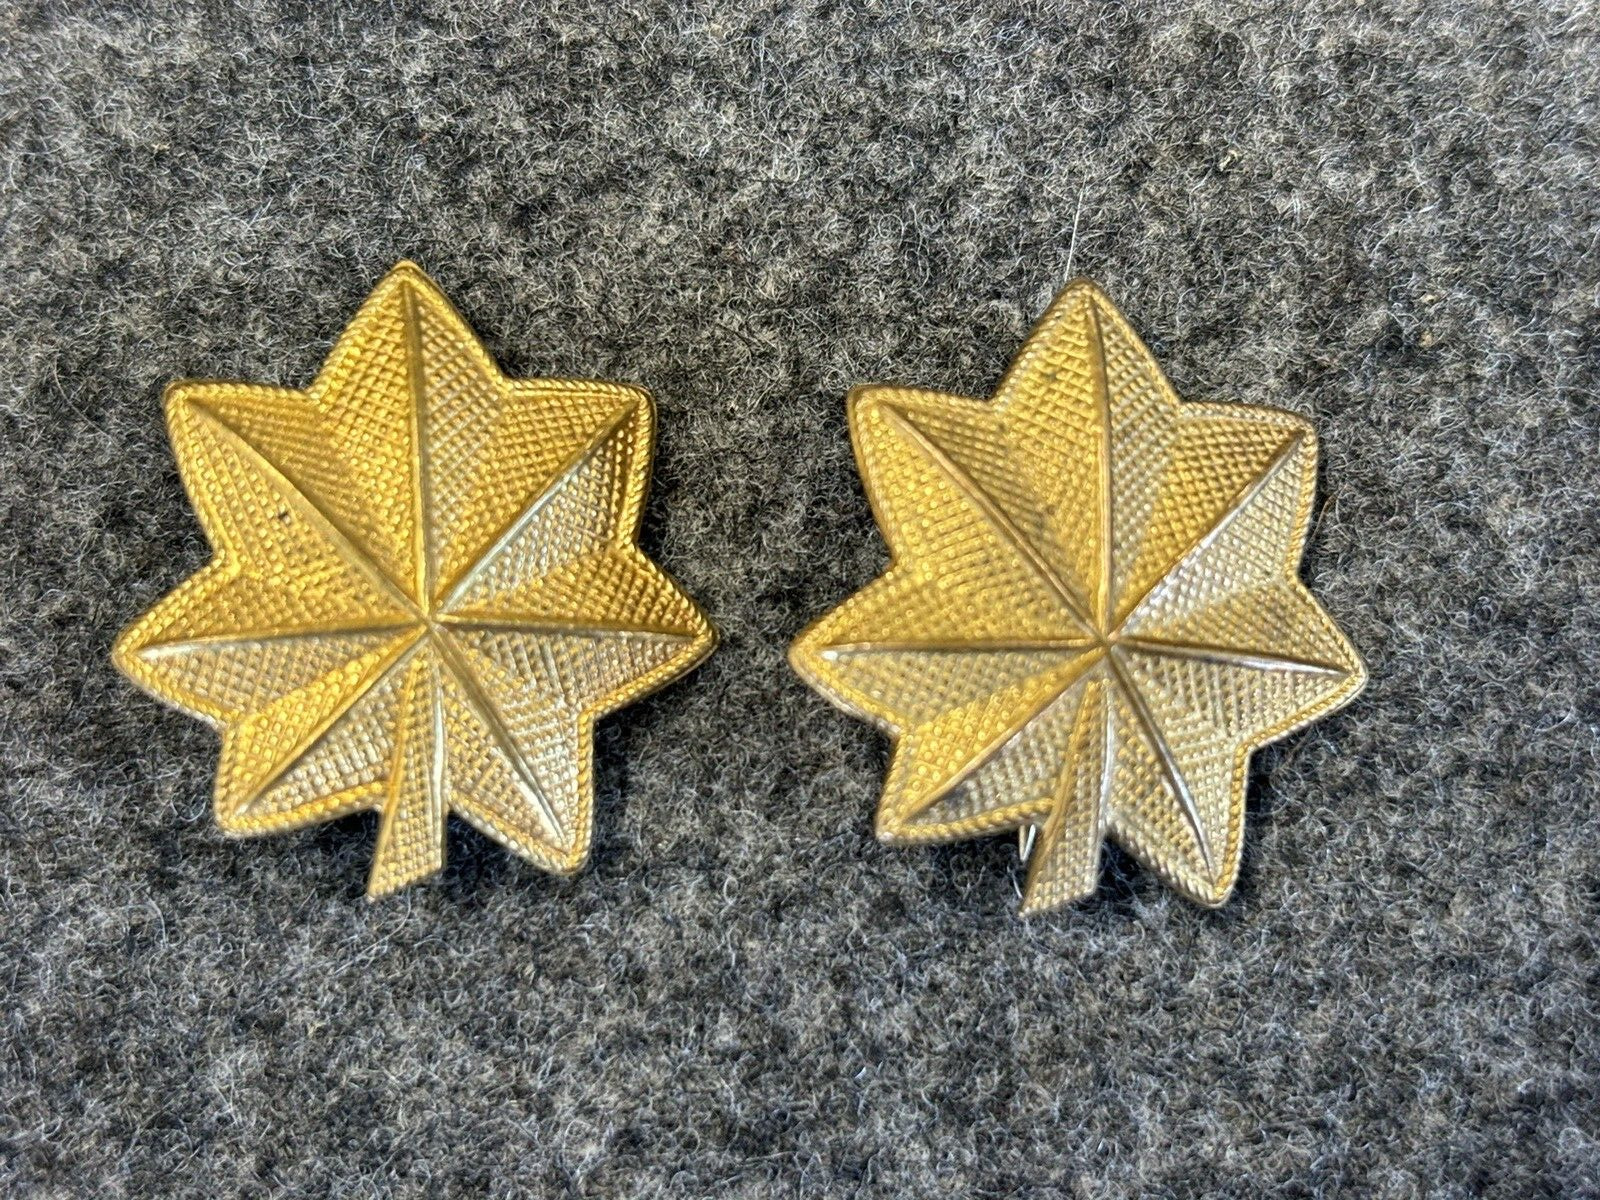 Original US Army WWII Major's Metal Rank Insignia, Pair, Maker Marked AMICO